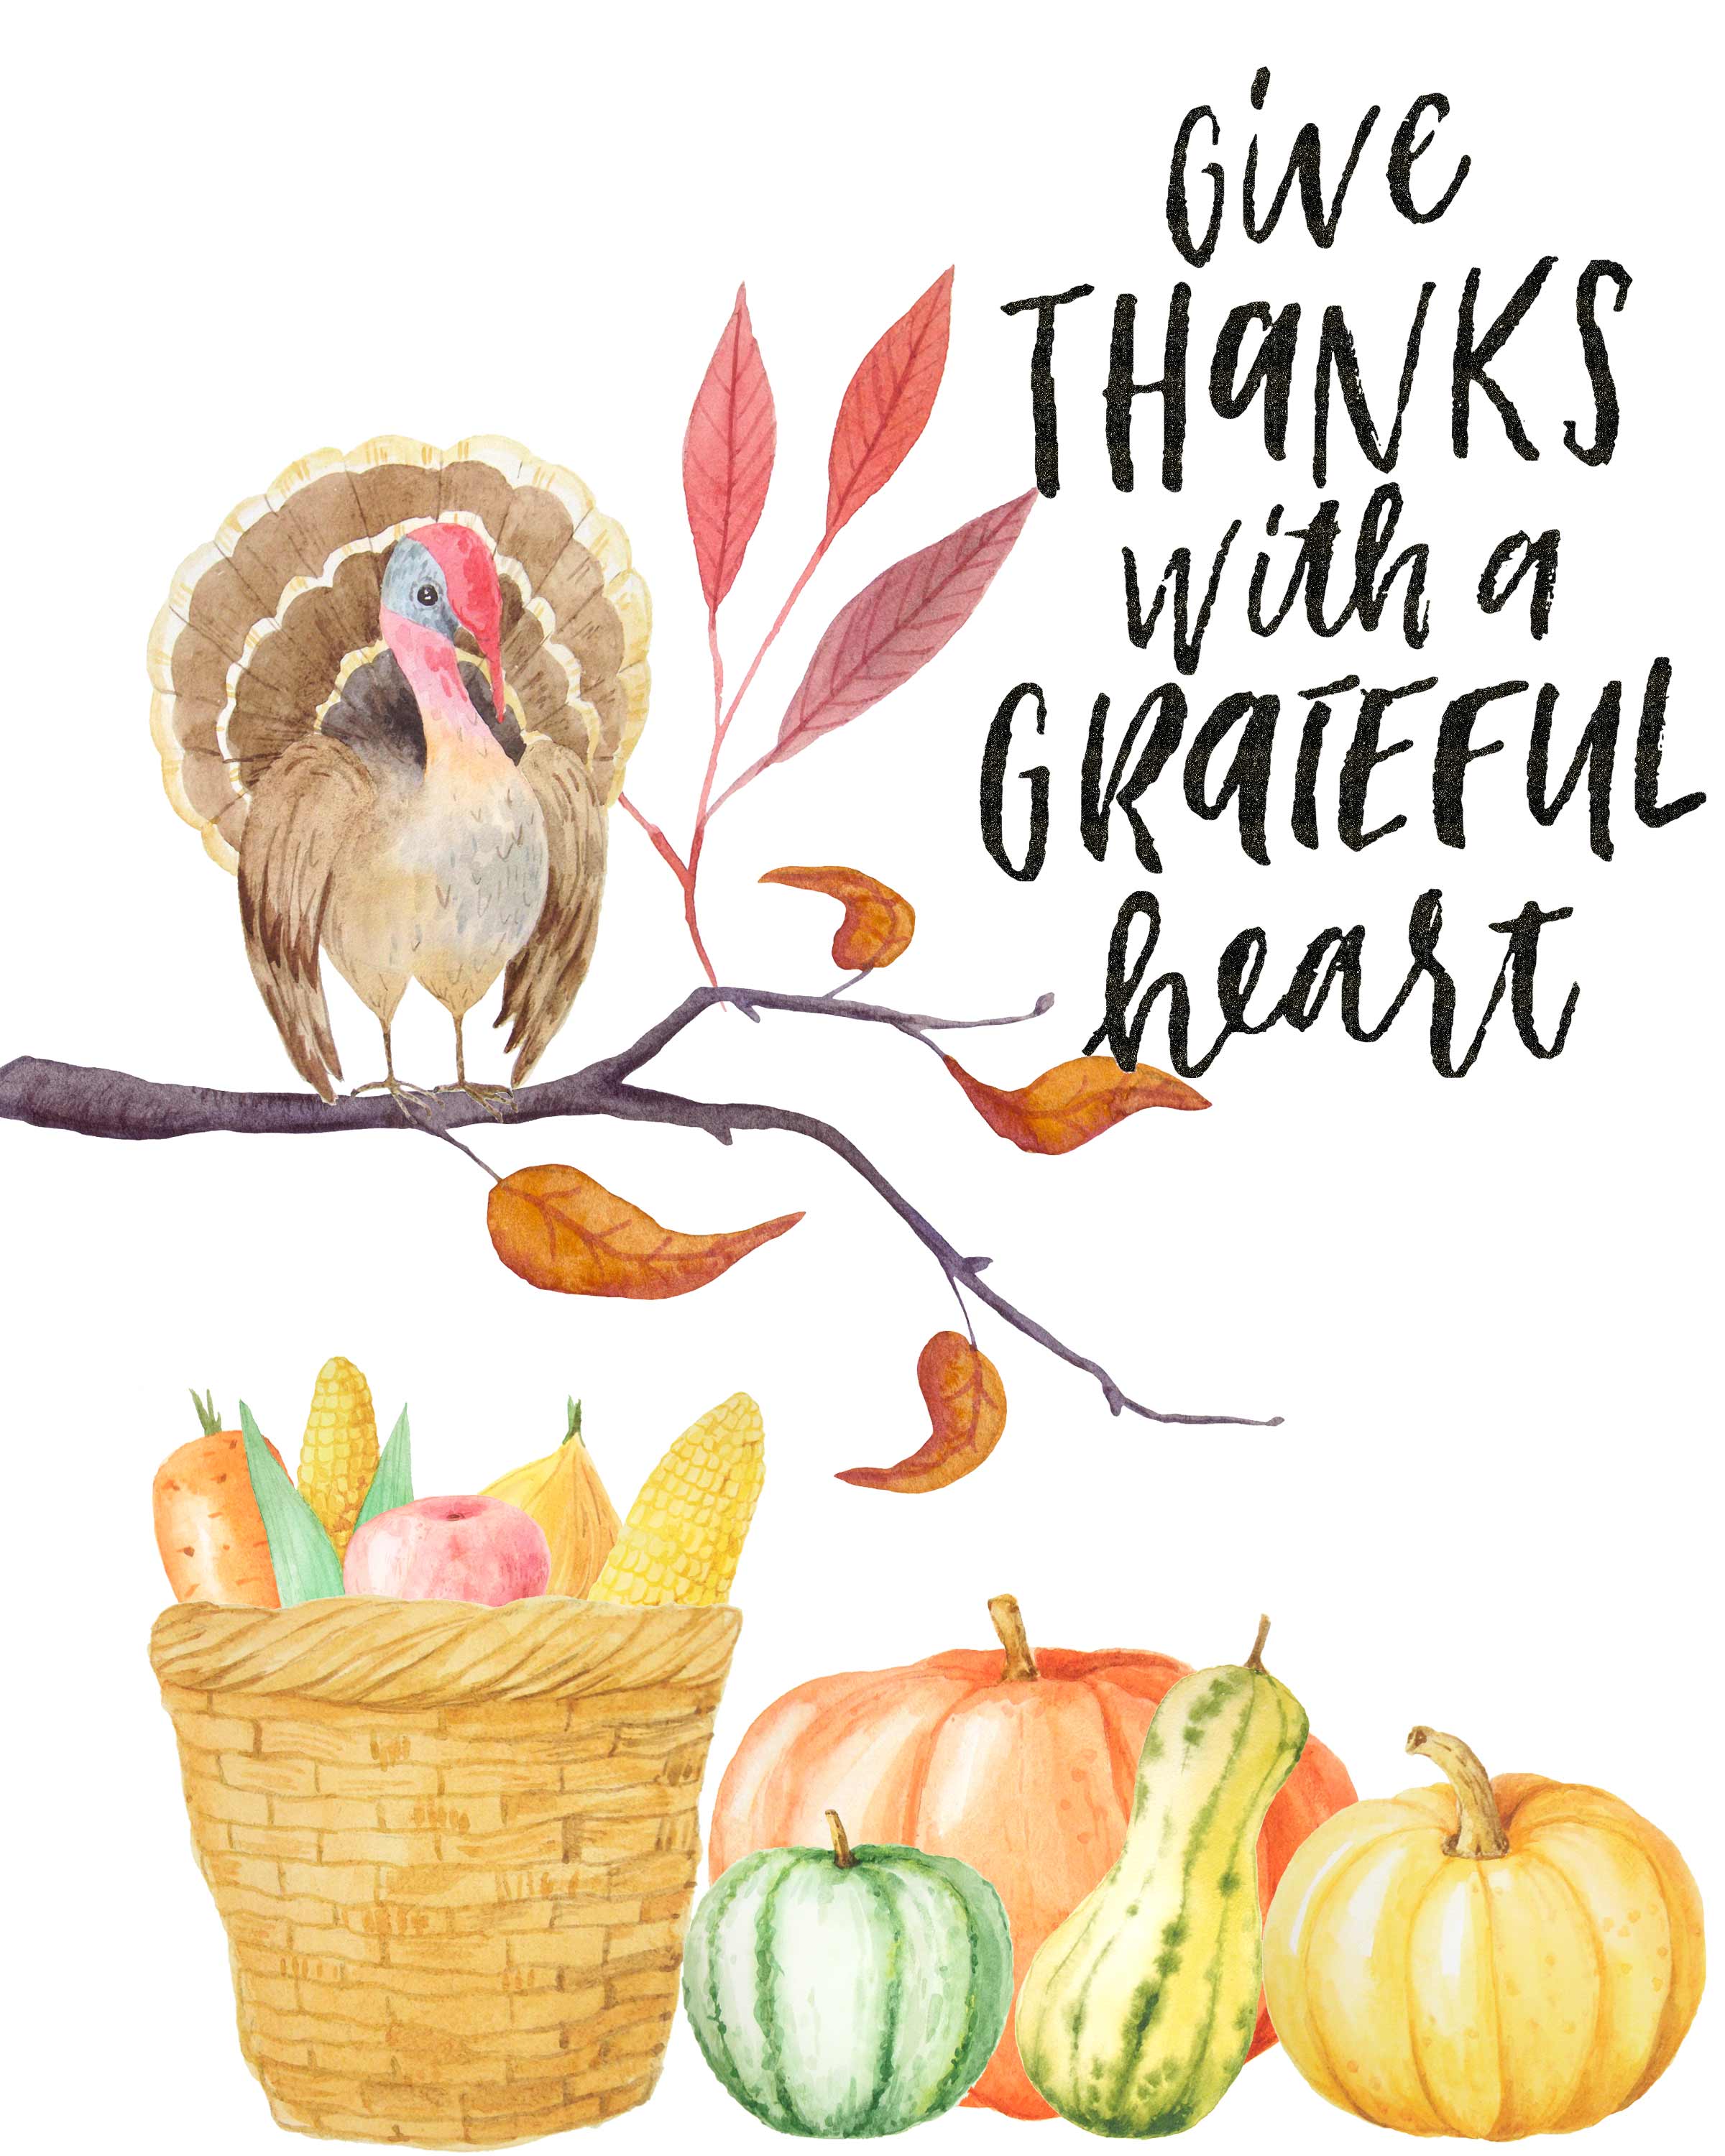 4 Gorgeous Free Printable Thanksgiving Wall Art Designs - Thanksgiving Arts & Crafts Ideas For Adults